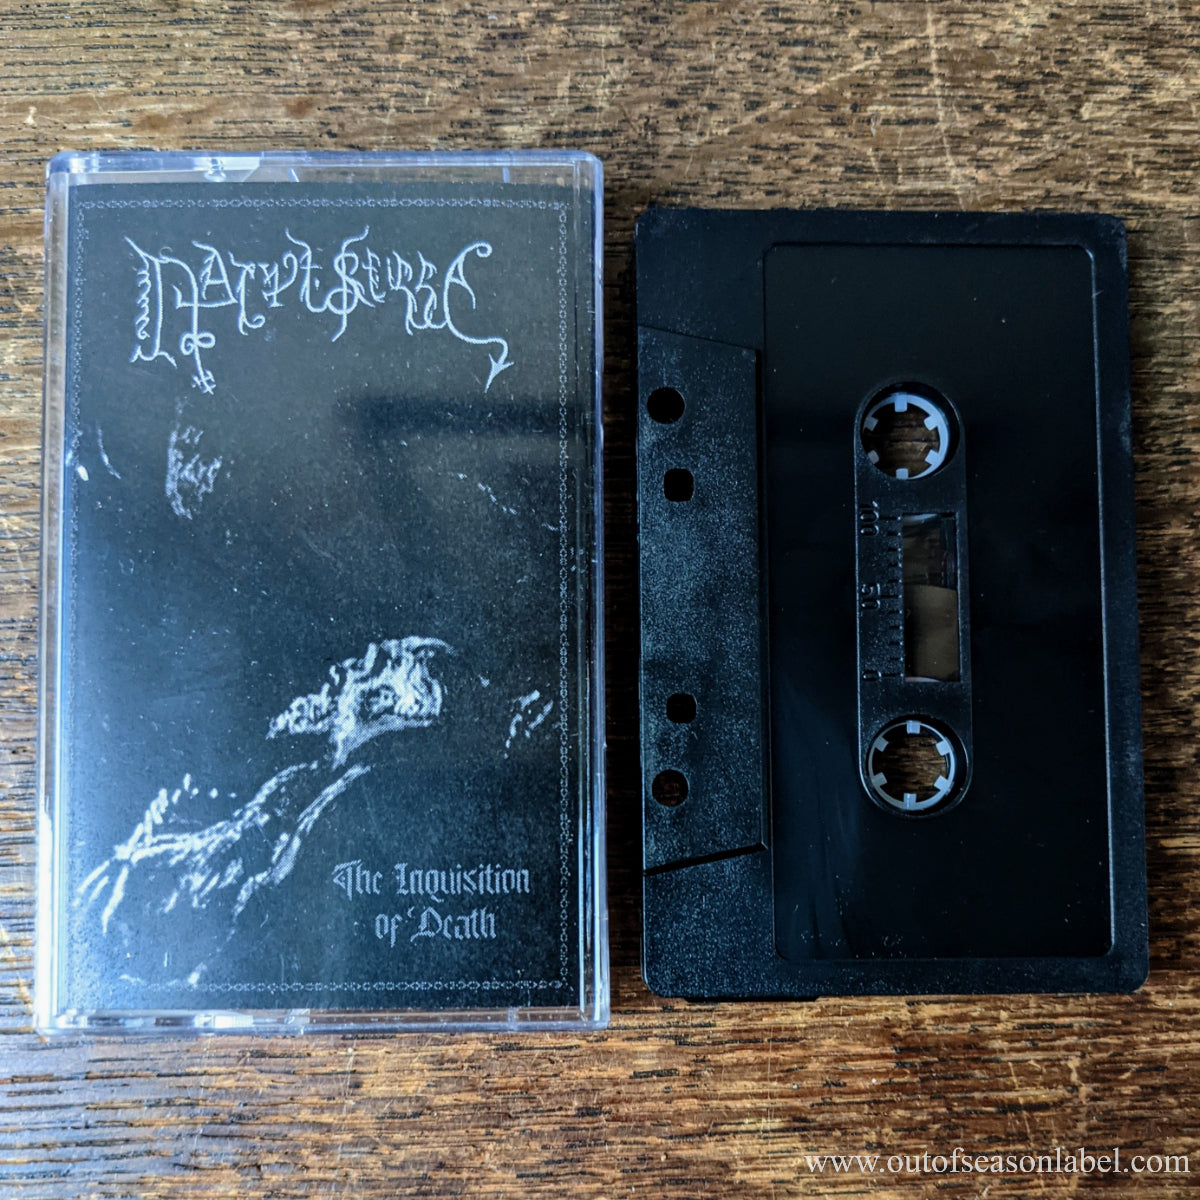 [SOLD OUT] NACHTSTILLE "The Inquisition of Death" Cassette Tape